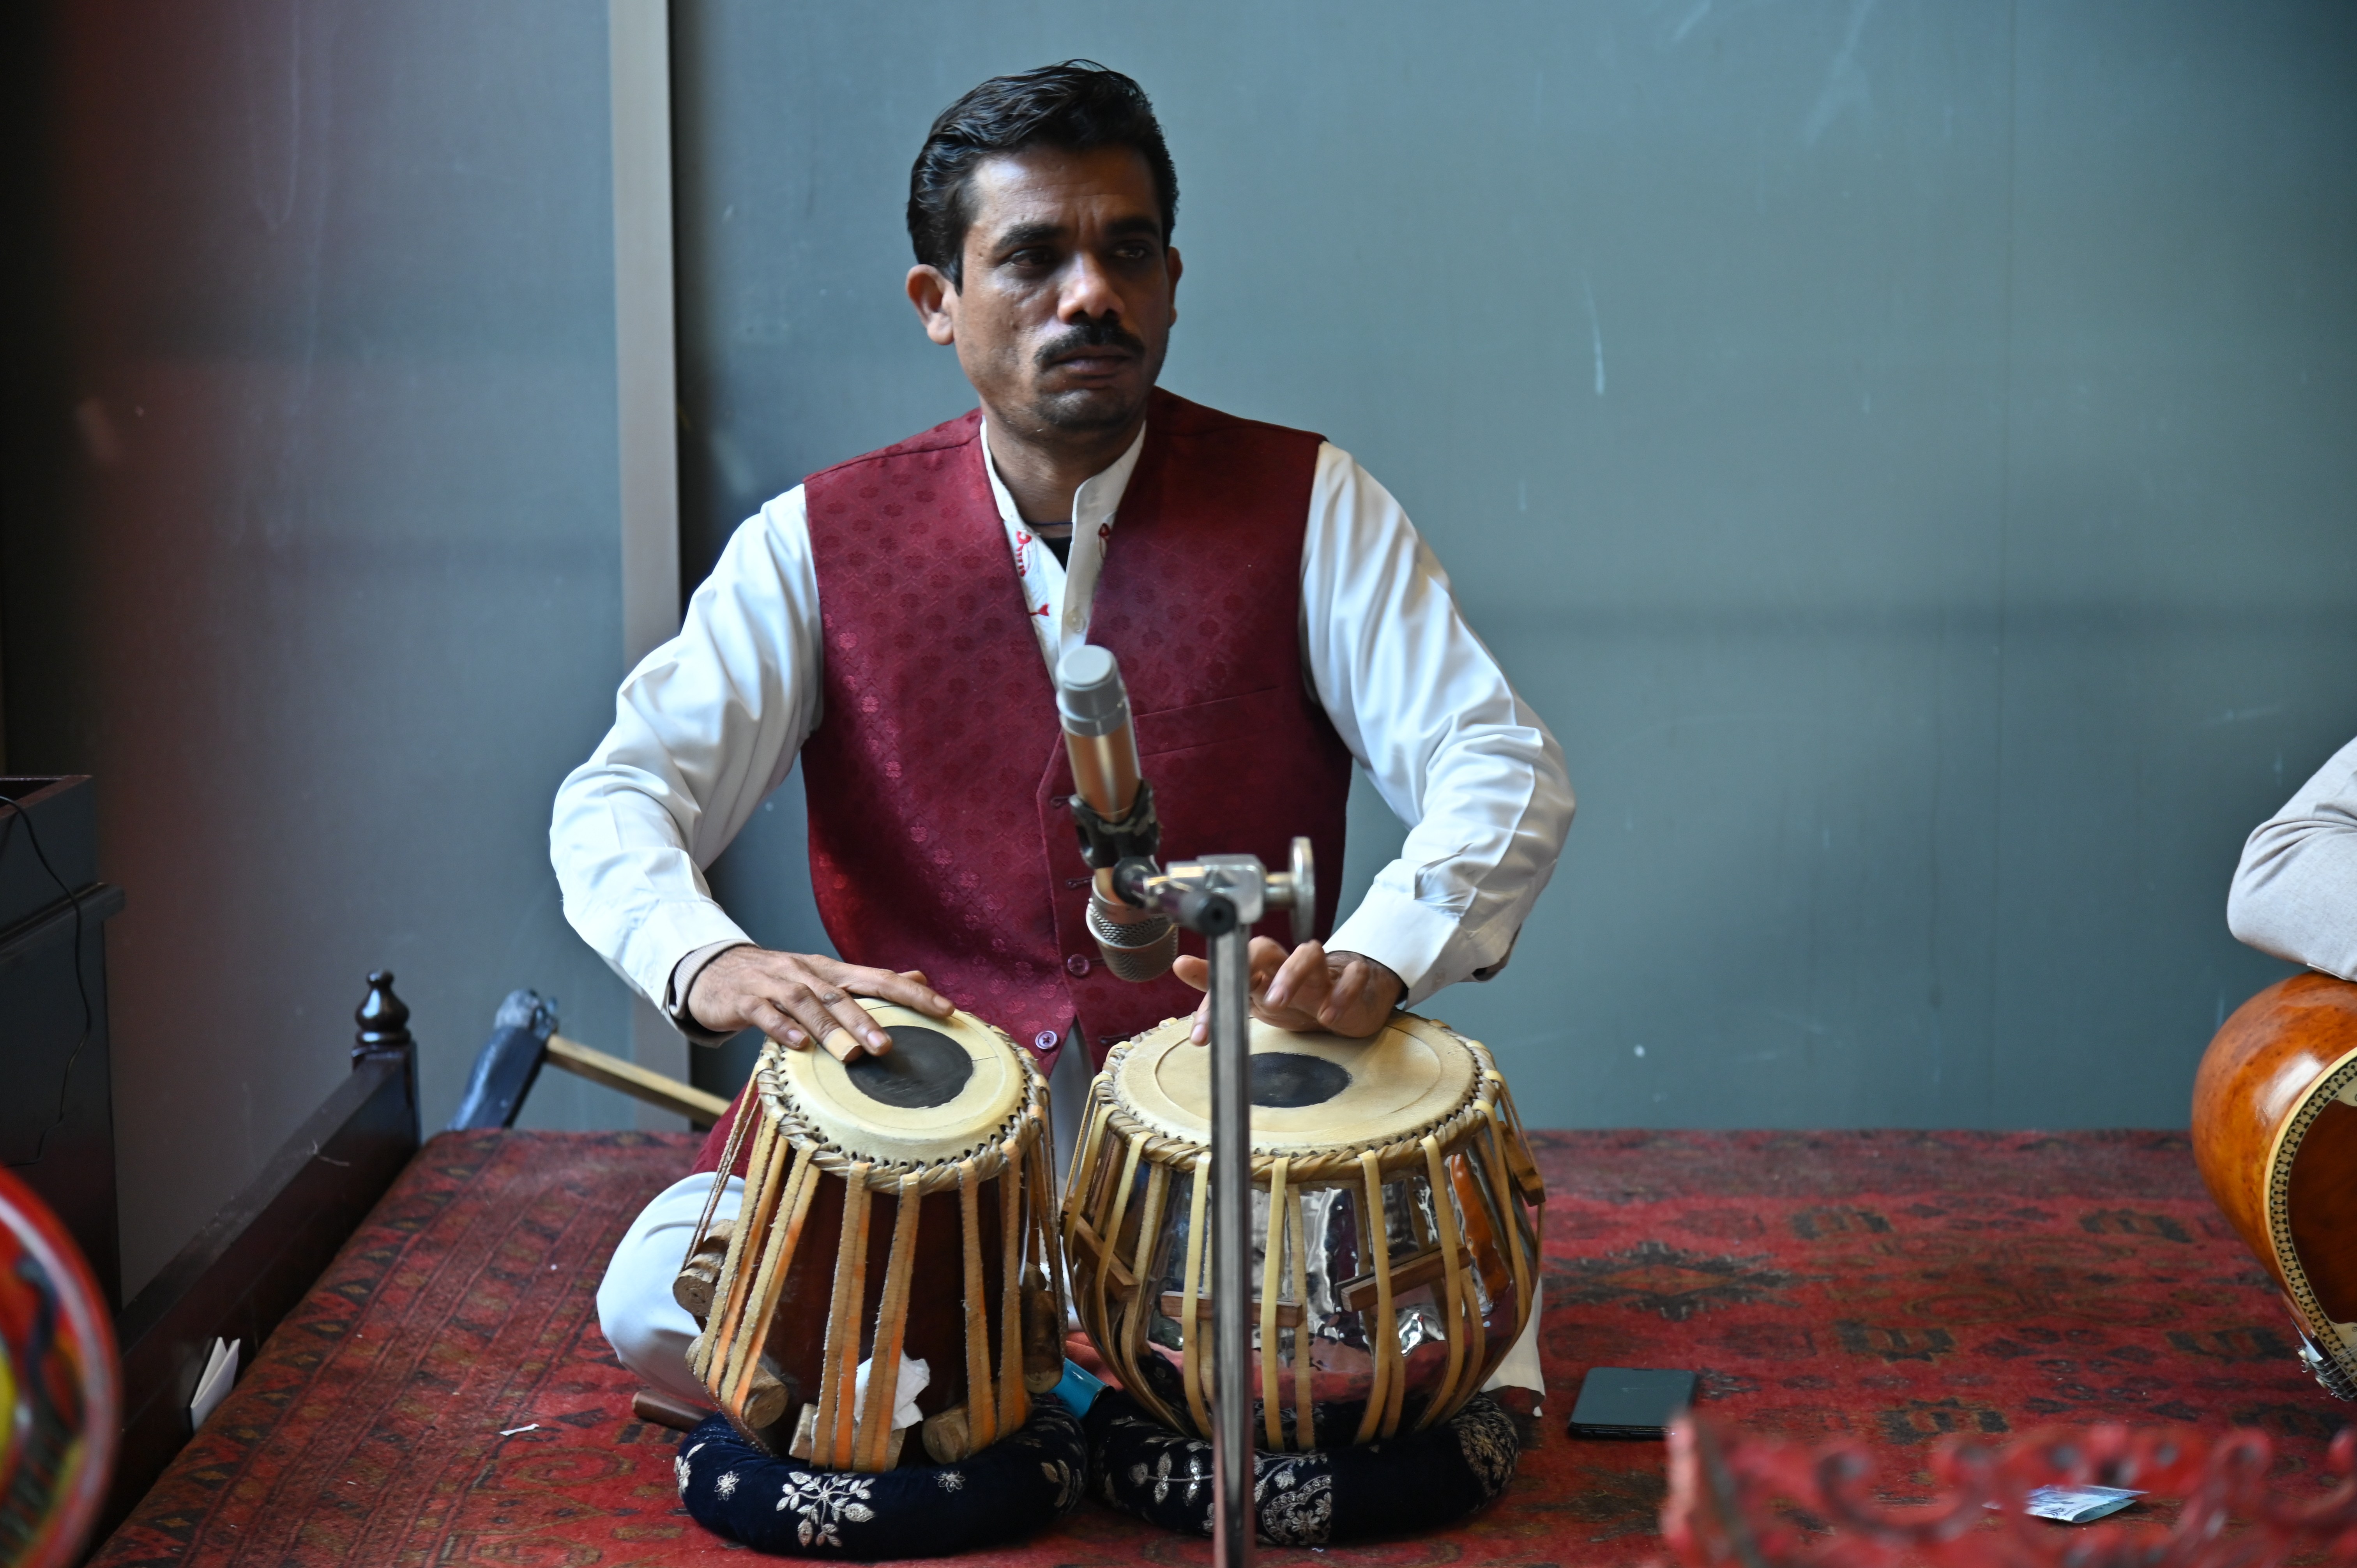 A musician playing Tabla:  a pair of hand drums common in the subcontinent culture